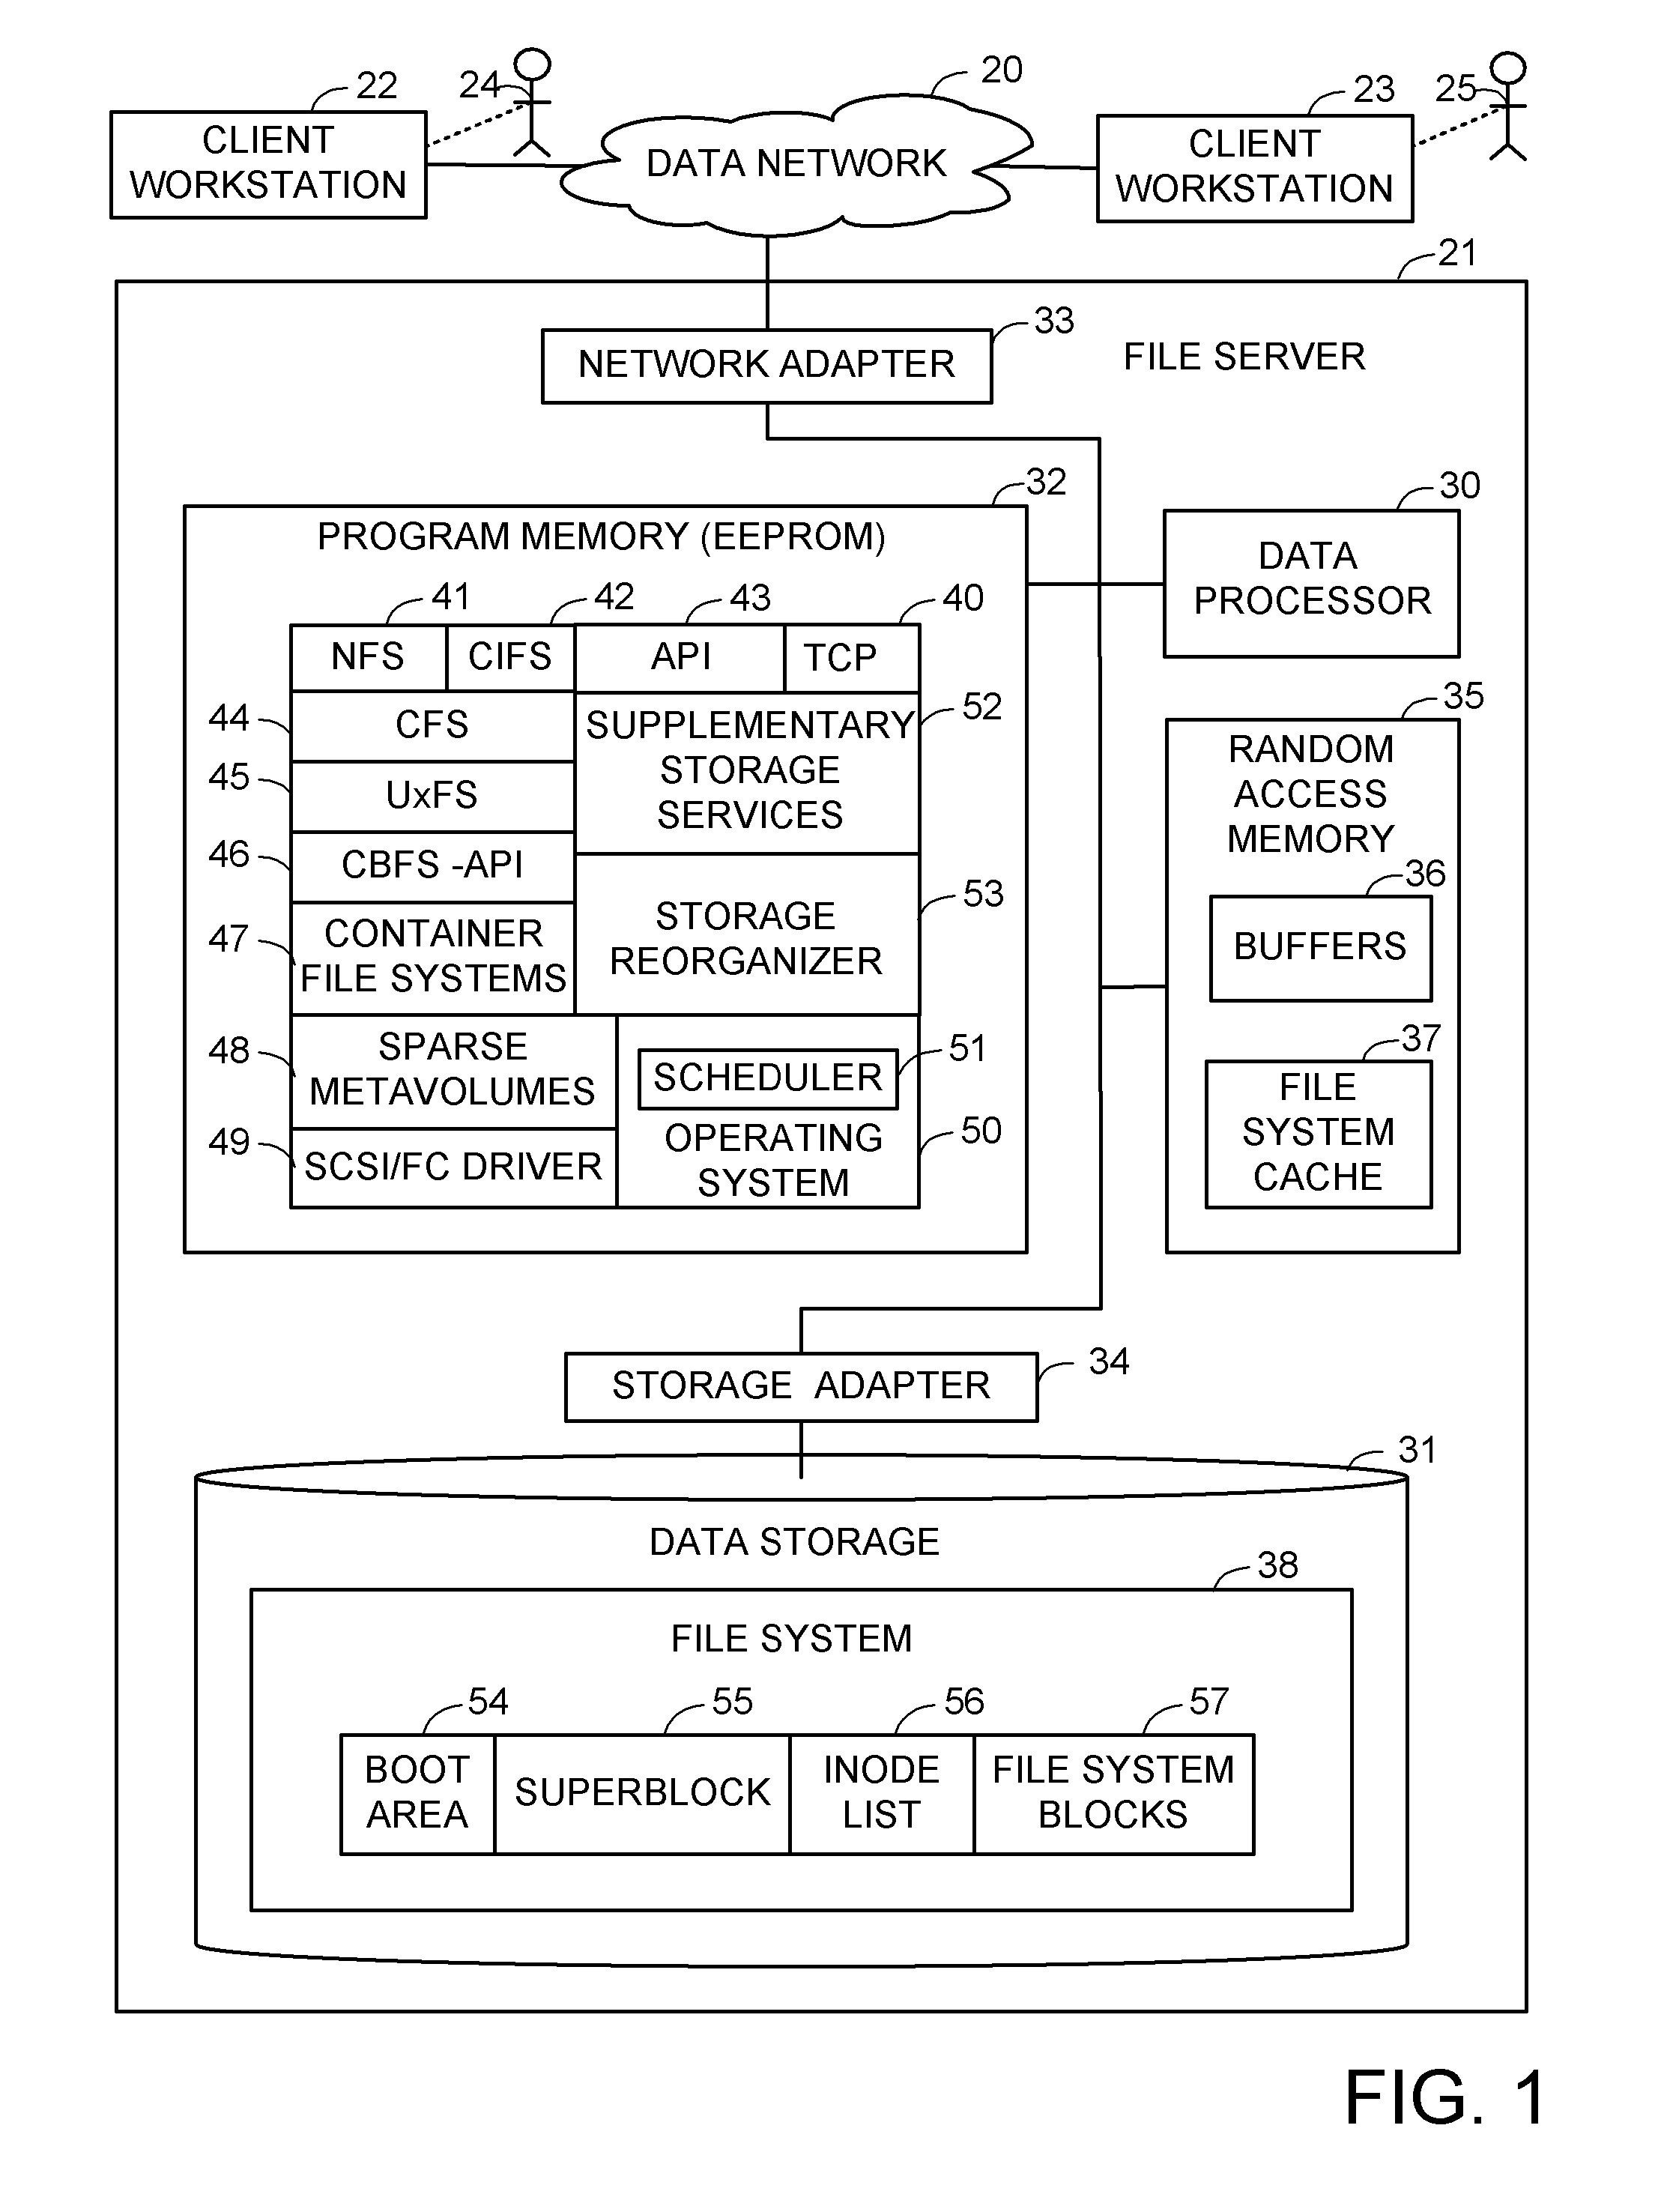 Hierarchical mapping of free blocks of cylinder groups of file systems built on slices of storage and linking of the free blocks